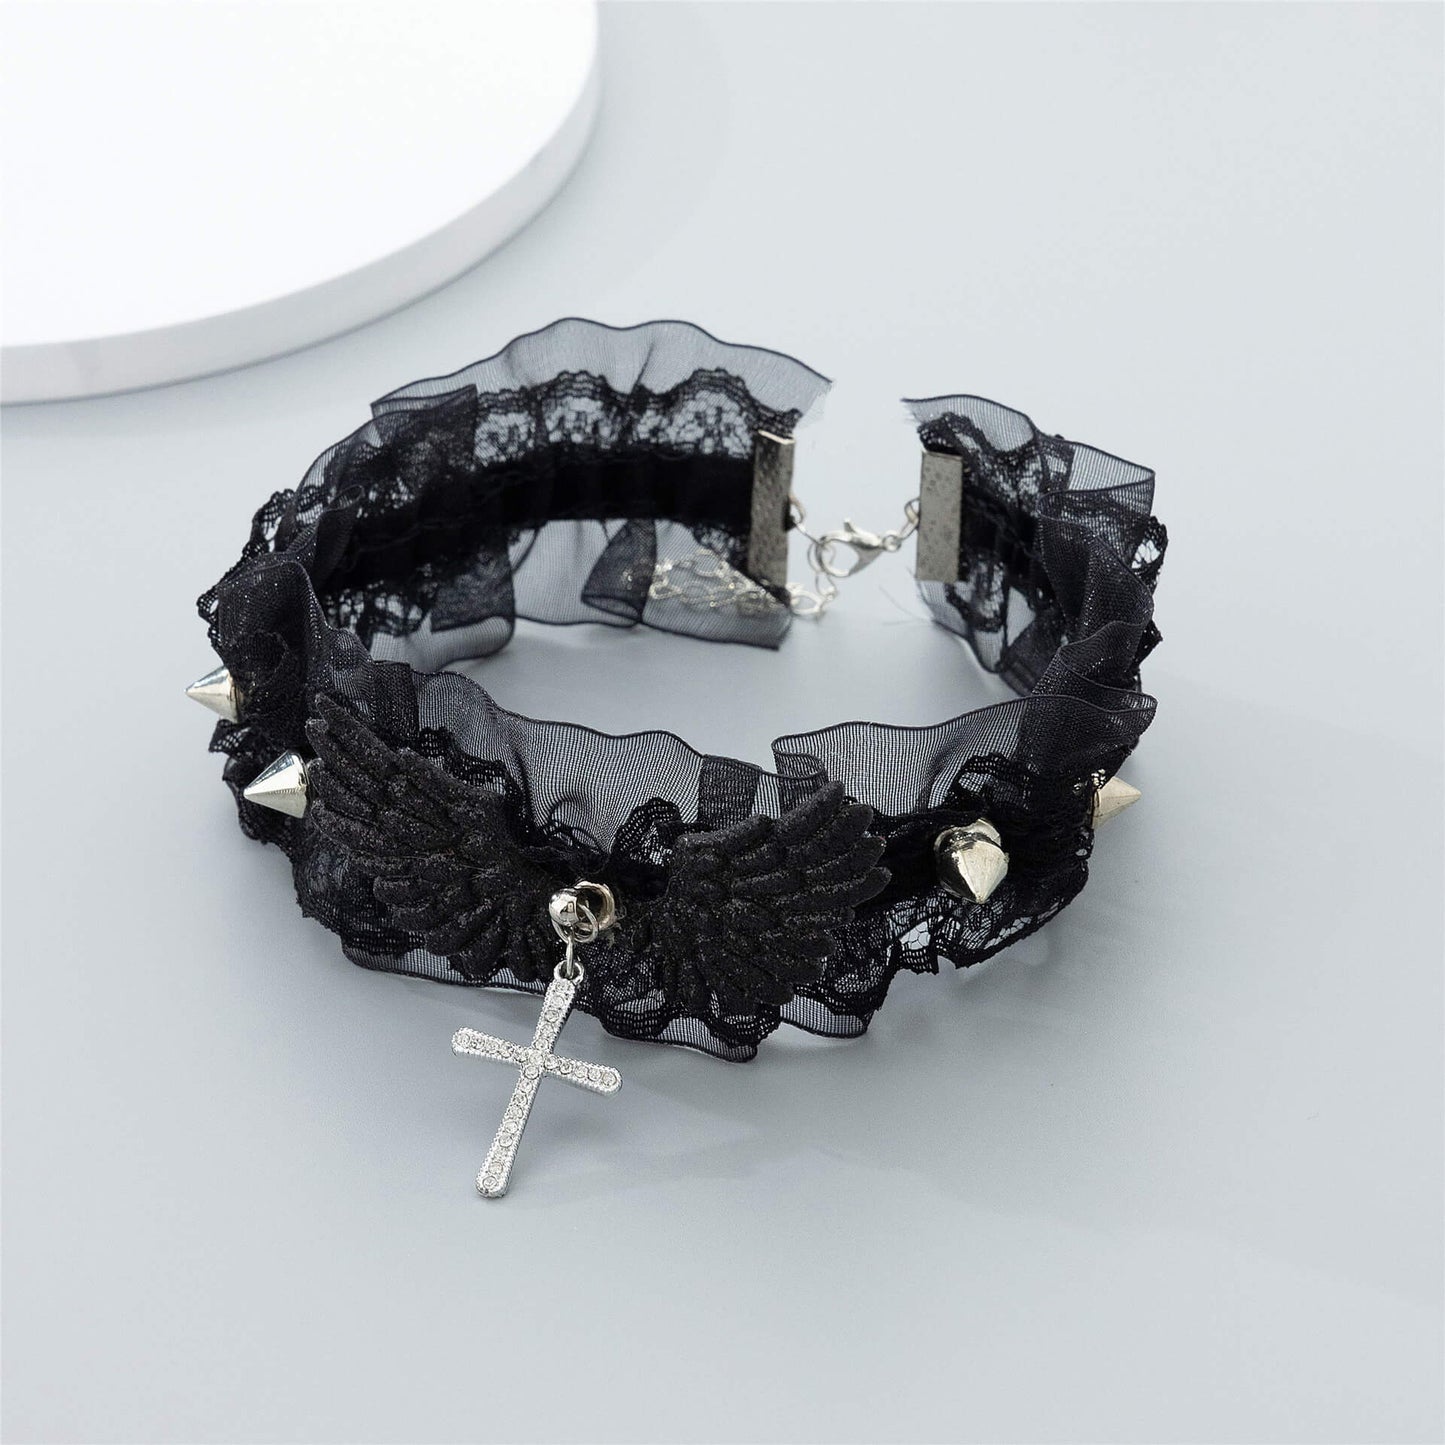 Black Choker Necklace With A Cross - Femboy Fashion